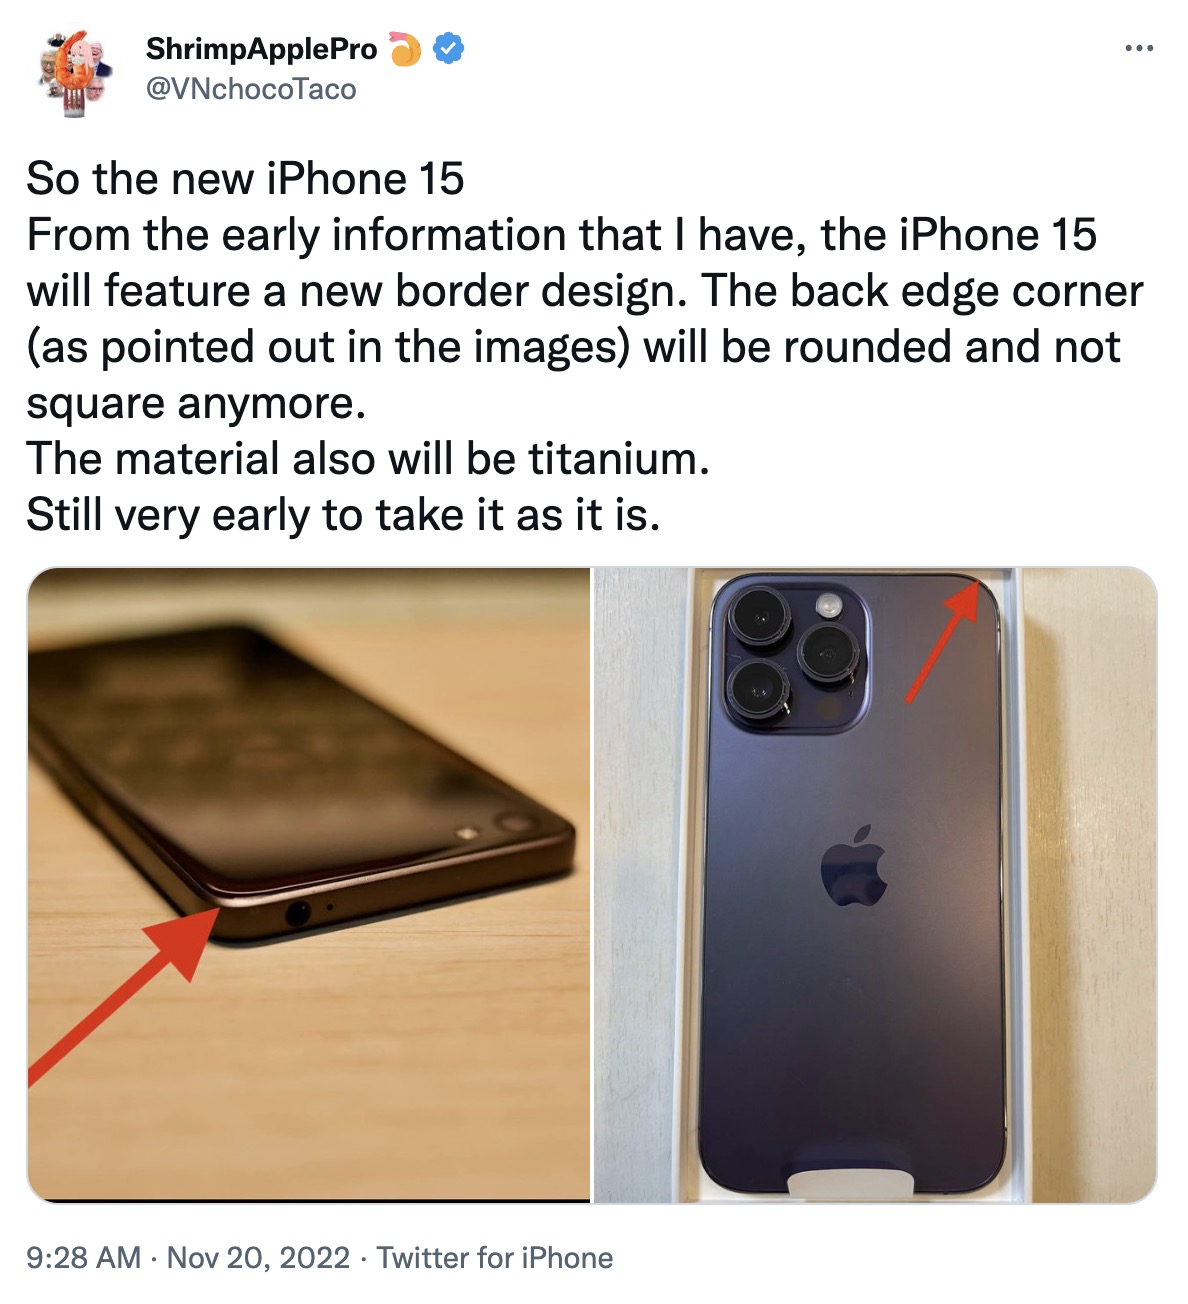 iPhone 15 May Have Titanium Case, Rounded Back